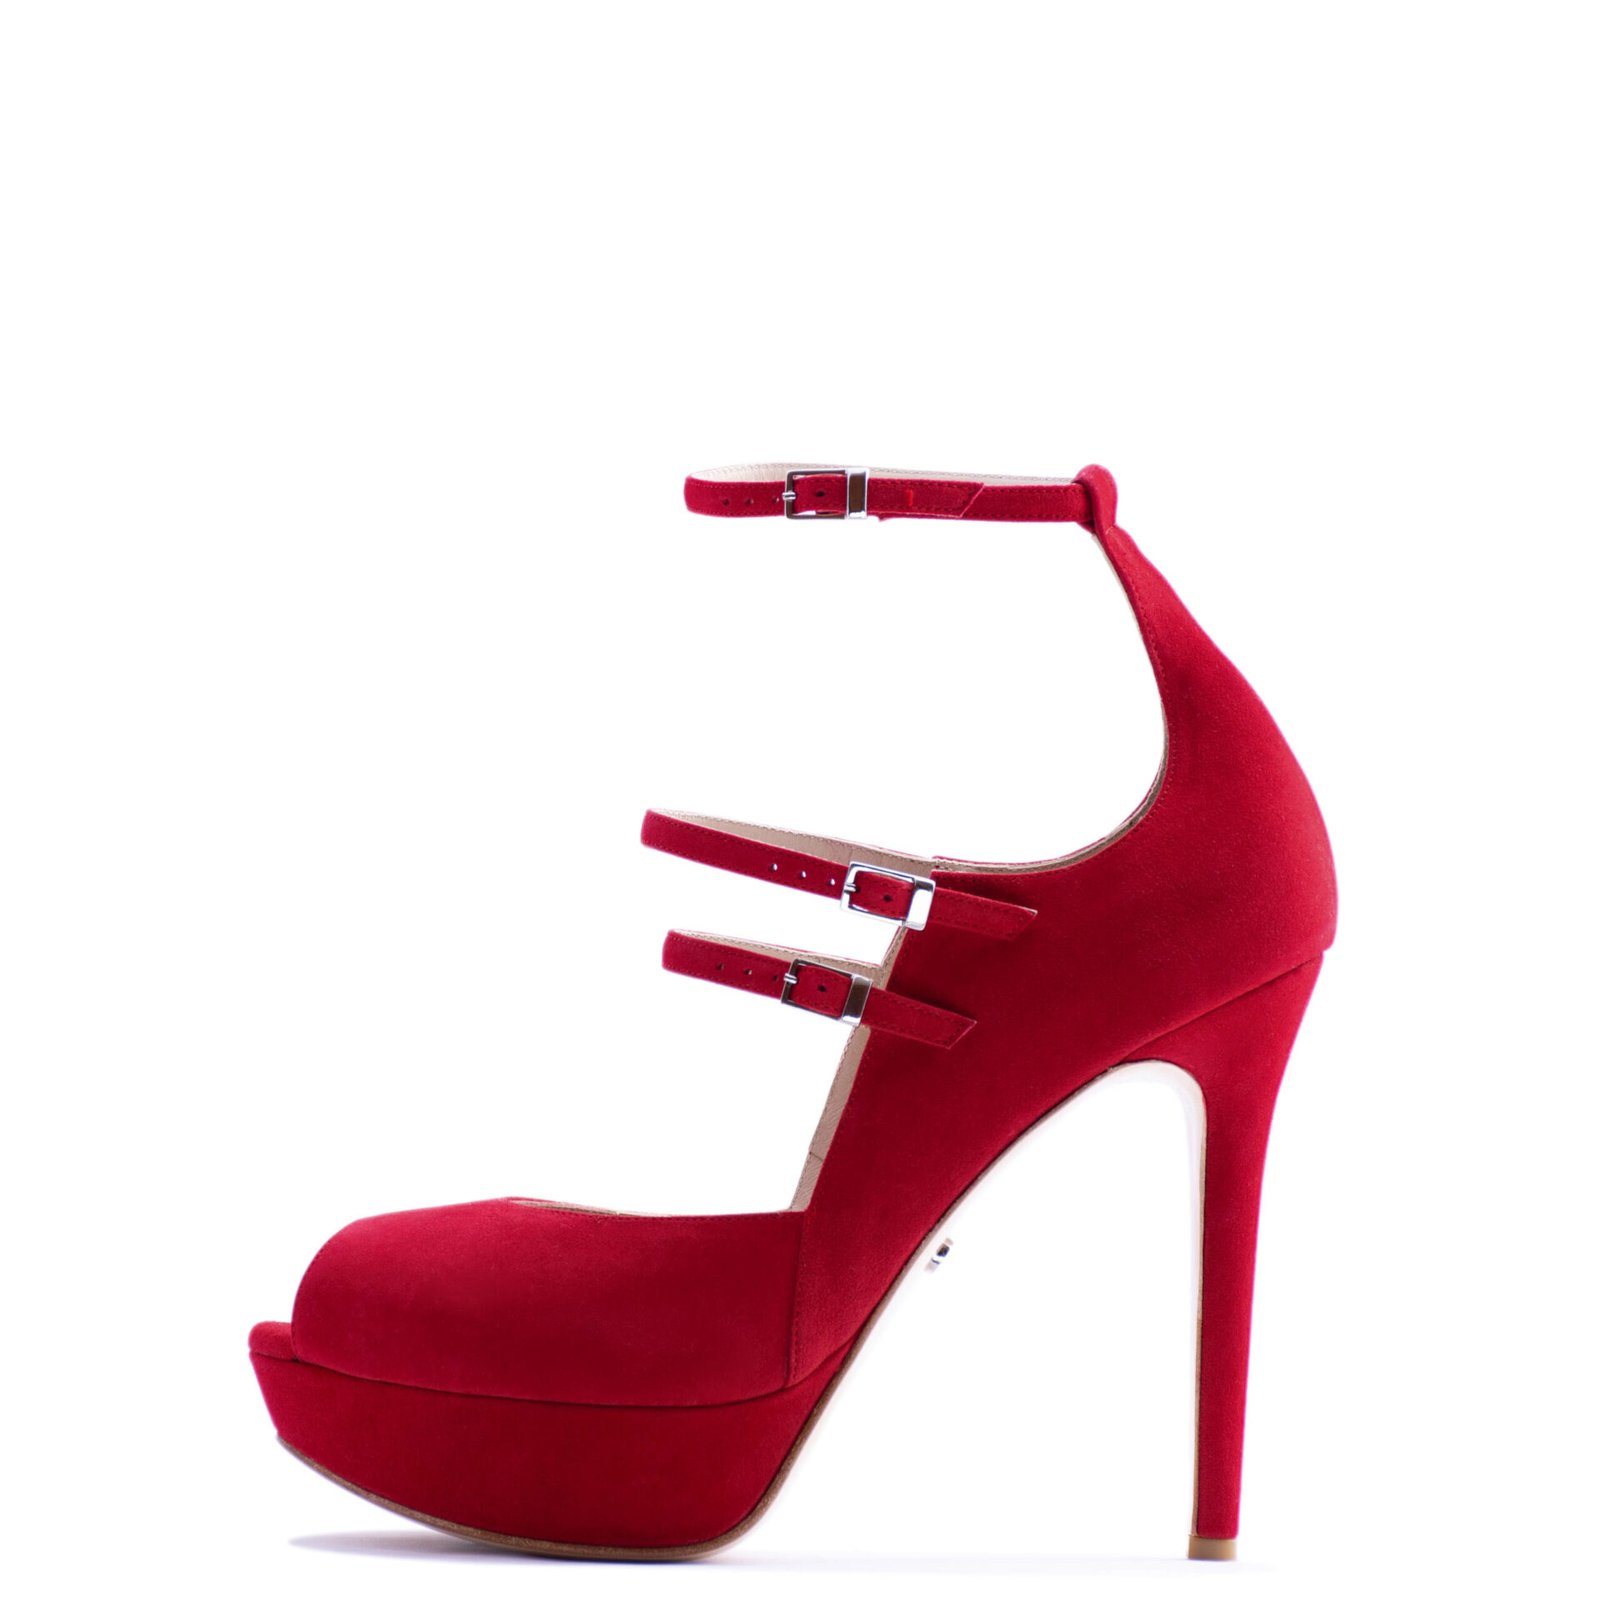 Red Strappy Heels for men and women